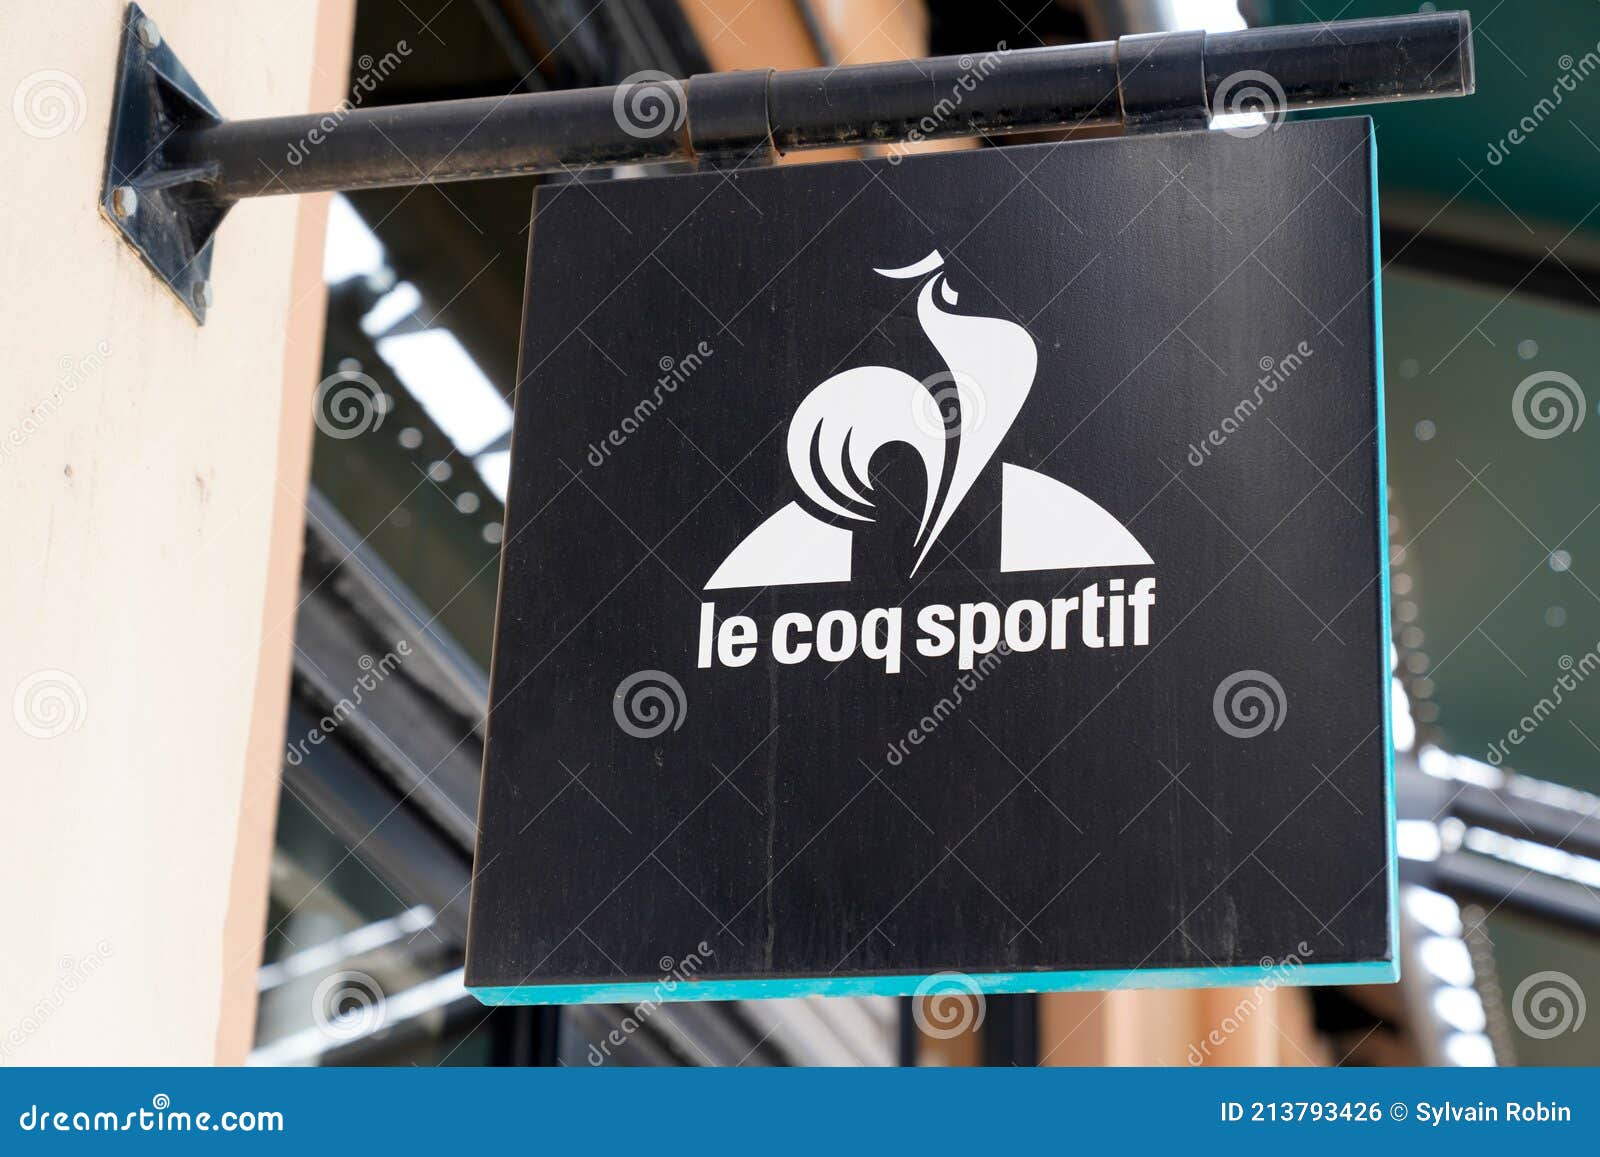 Le Coq Sportif Logo Brand and Text Sign of Sportswear Store Supplier of ...